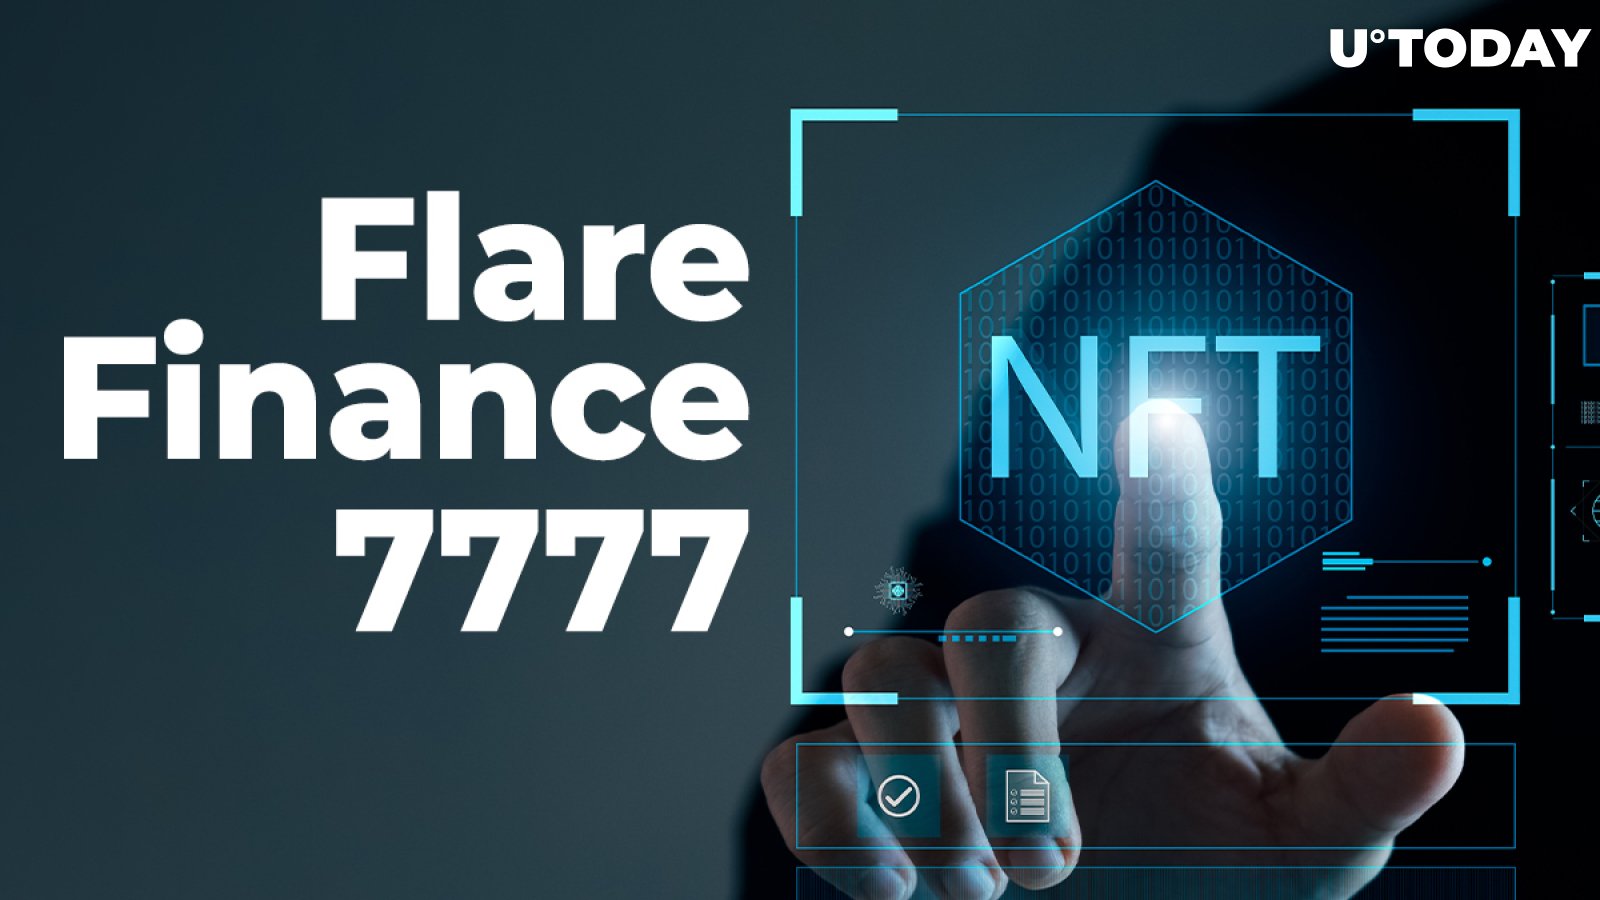 Flare Finance to Release 7777 DeLorean NFTs, Here's Why This Is Important for Its Community